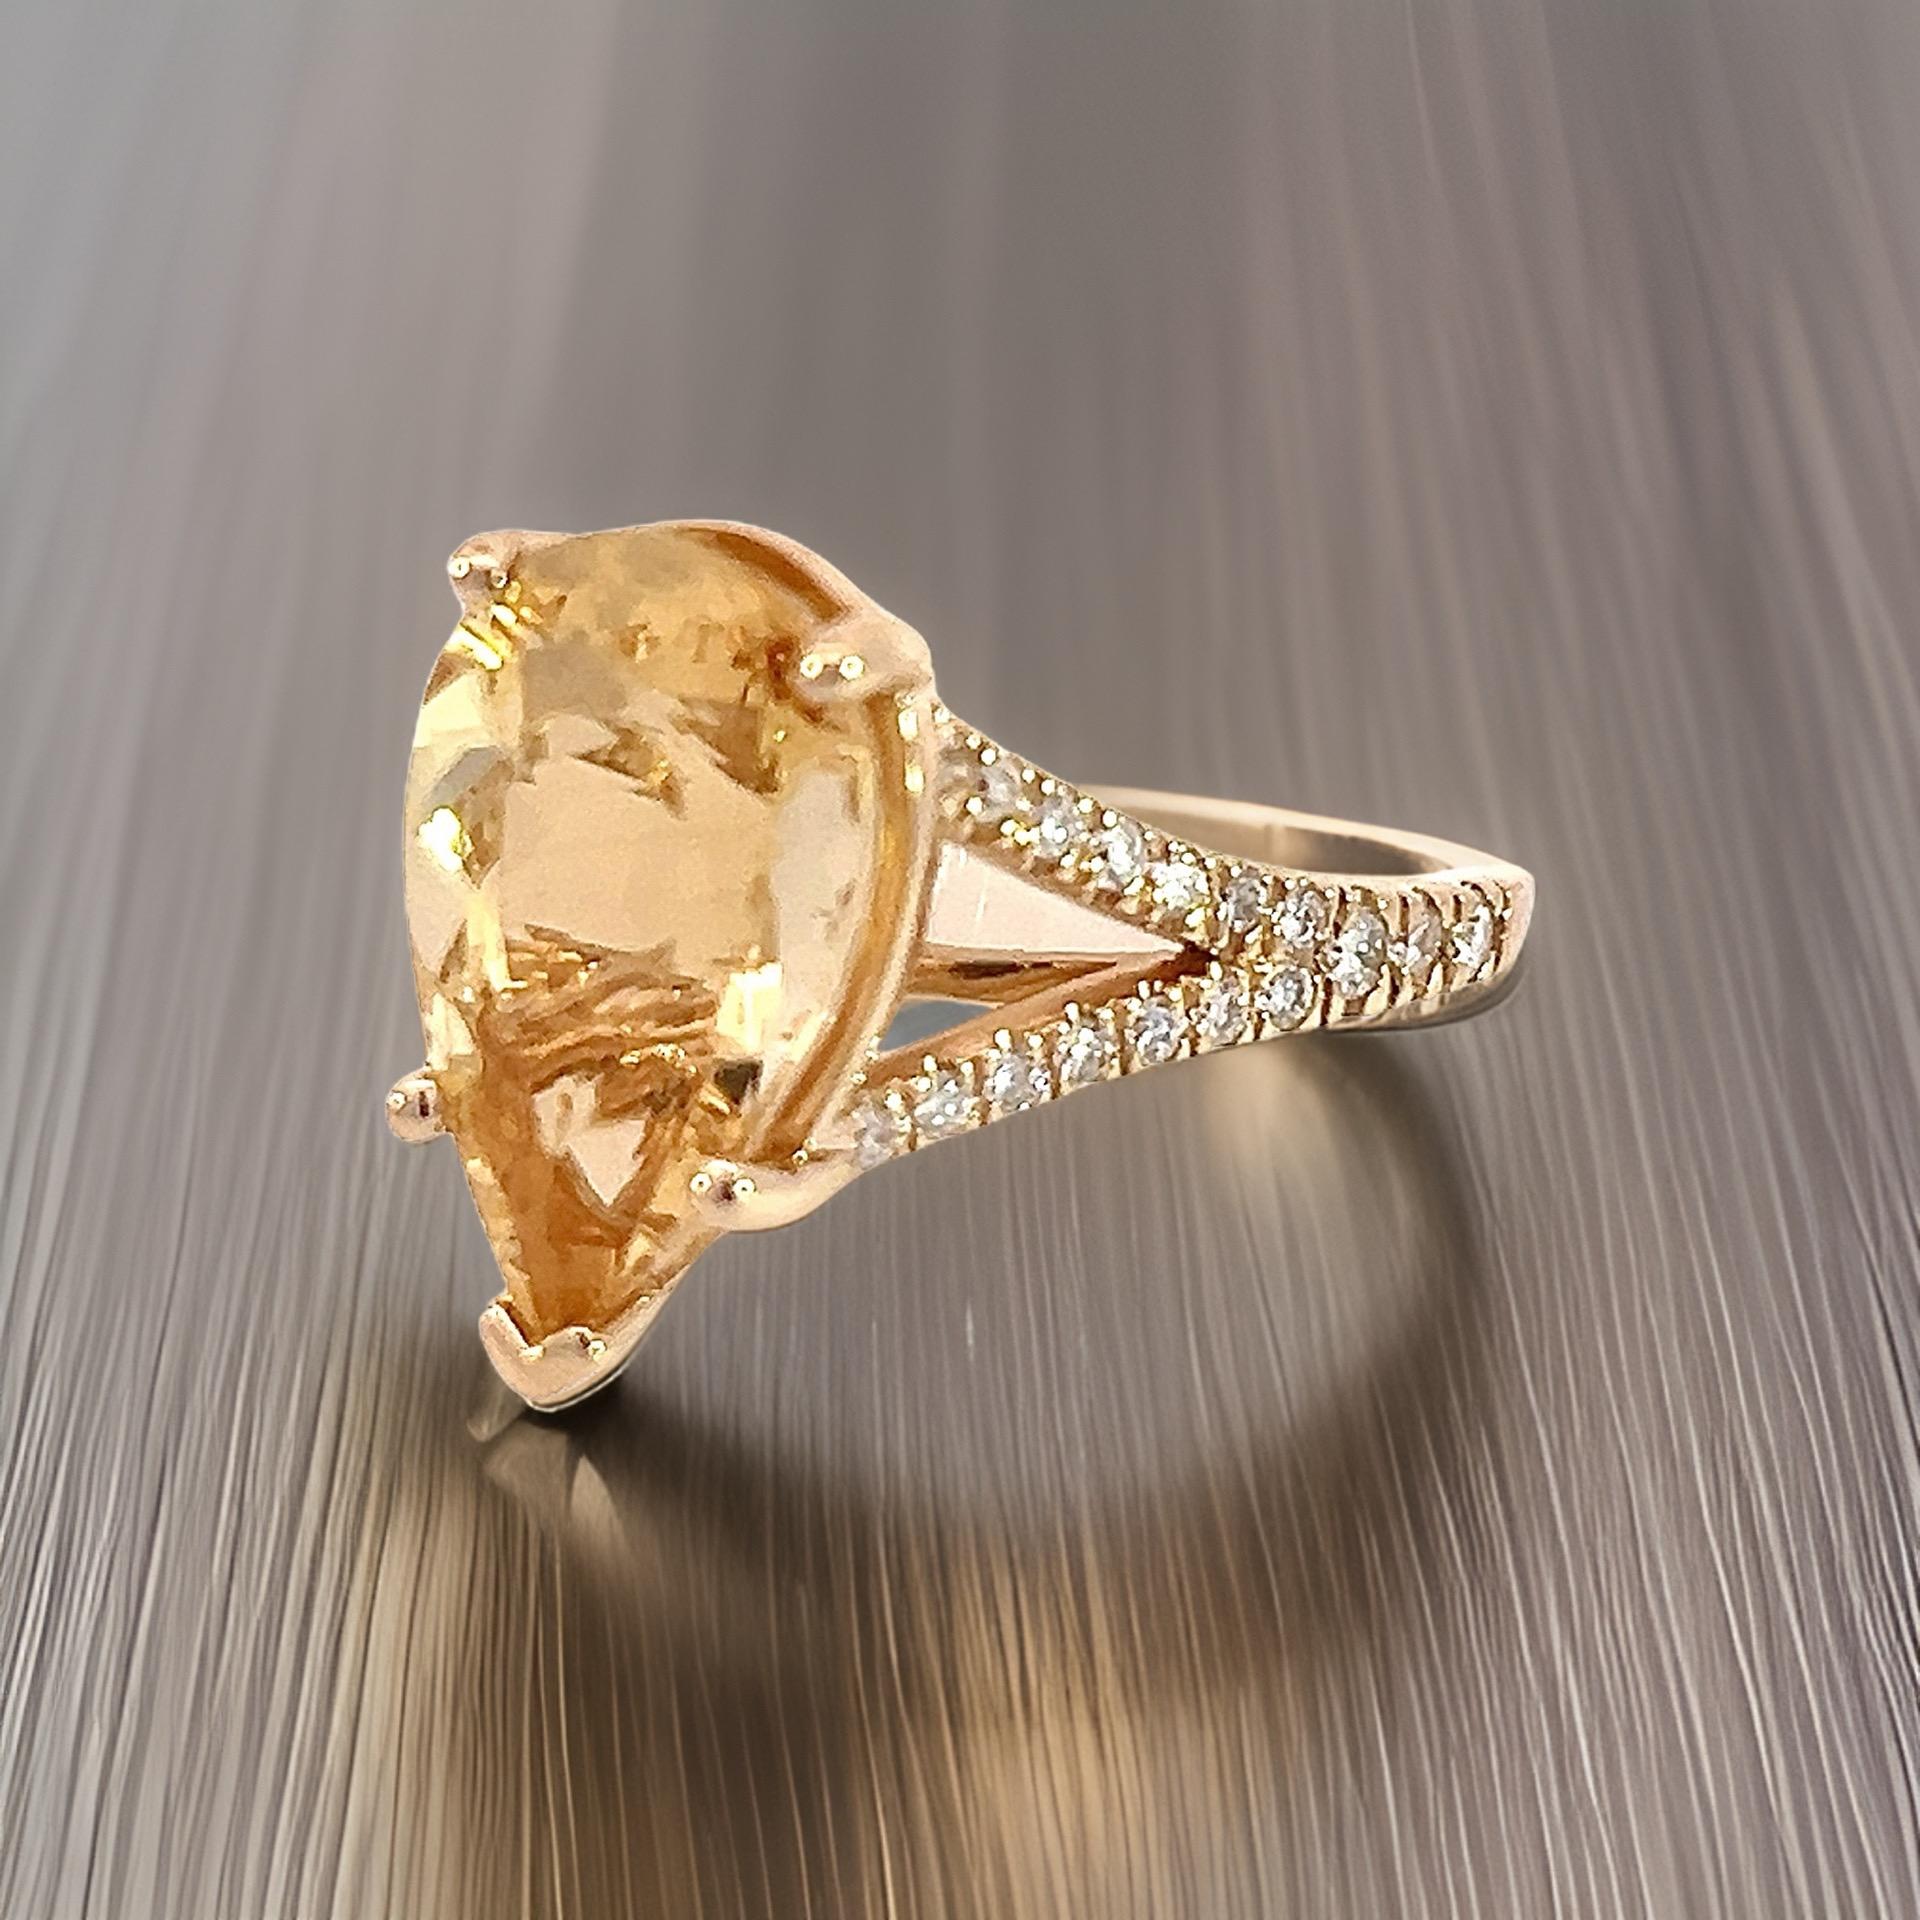 Natural Citrine Diamond Ring 6.5 14k Y Gold 4.79 TCW Certified In New Condition For Sale In Brooklyn, NY